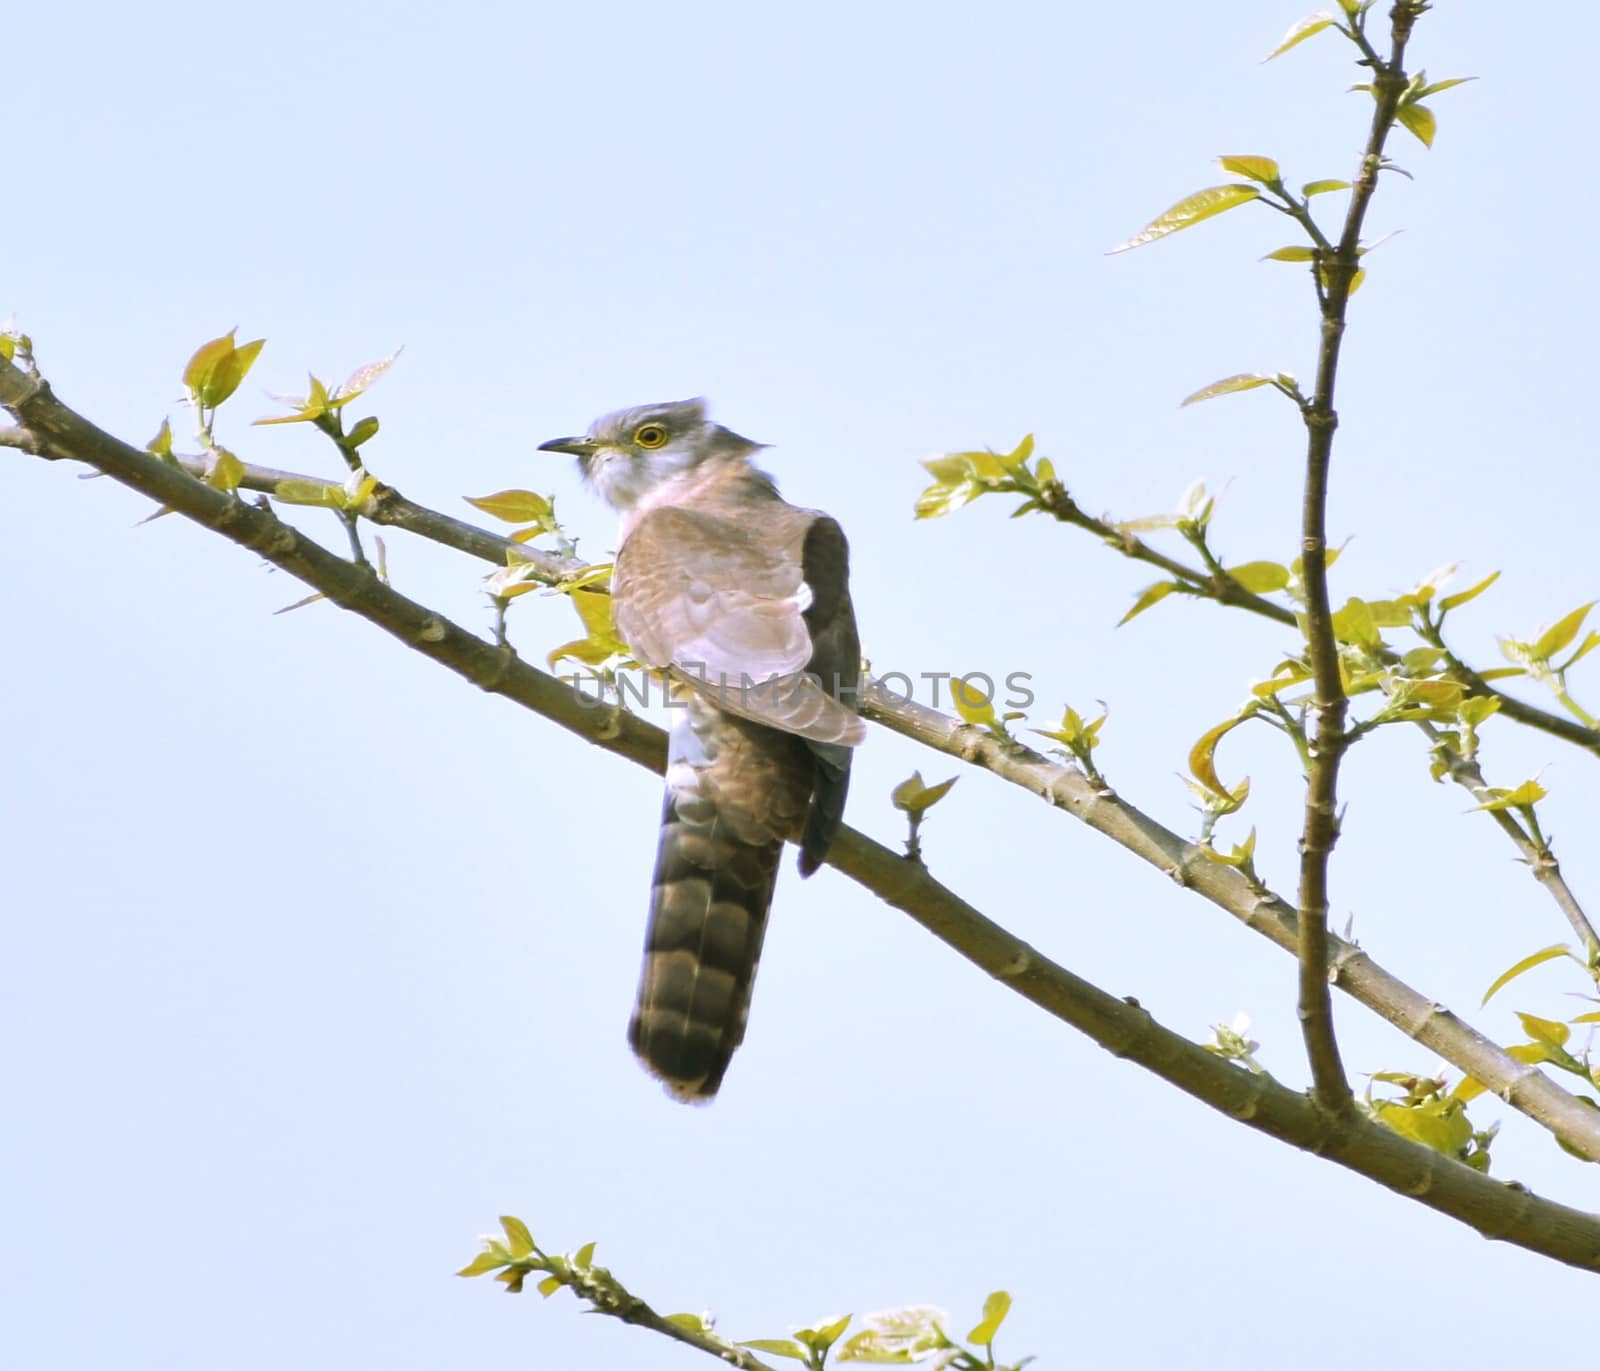 A common hawk cuckoo sitting on a tree branch to begin its typical cuckoo call